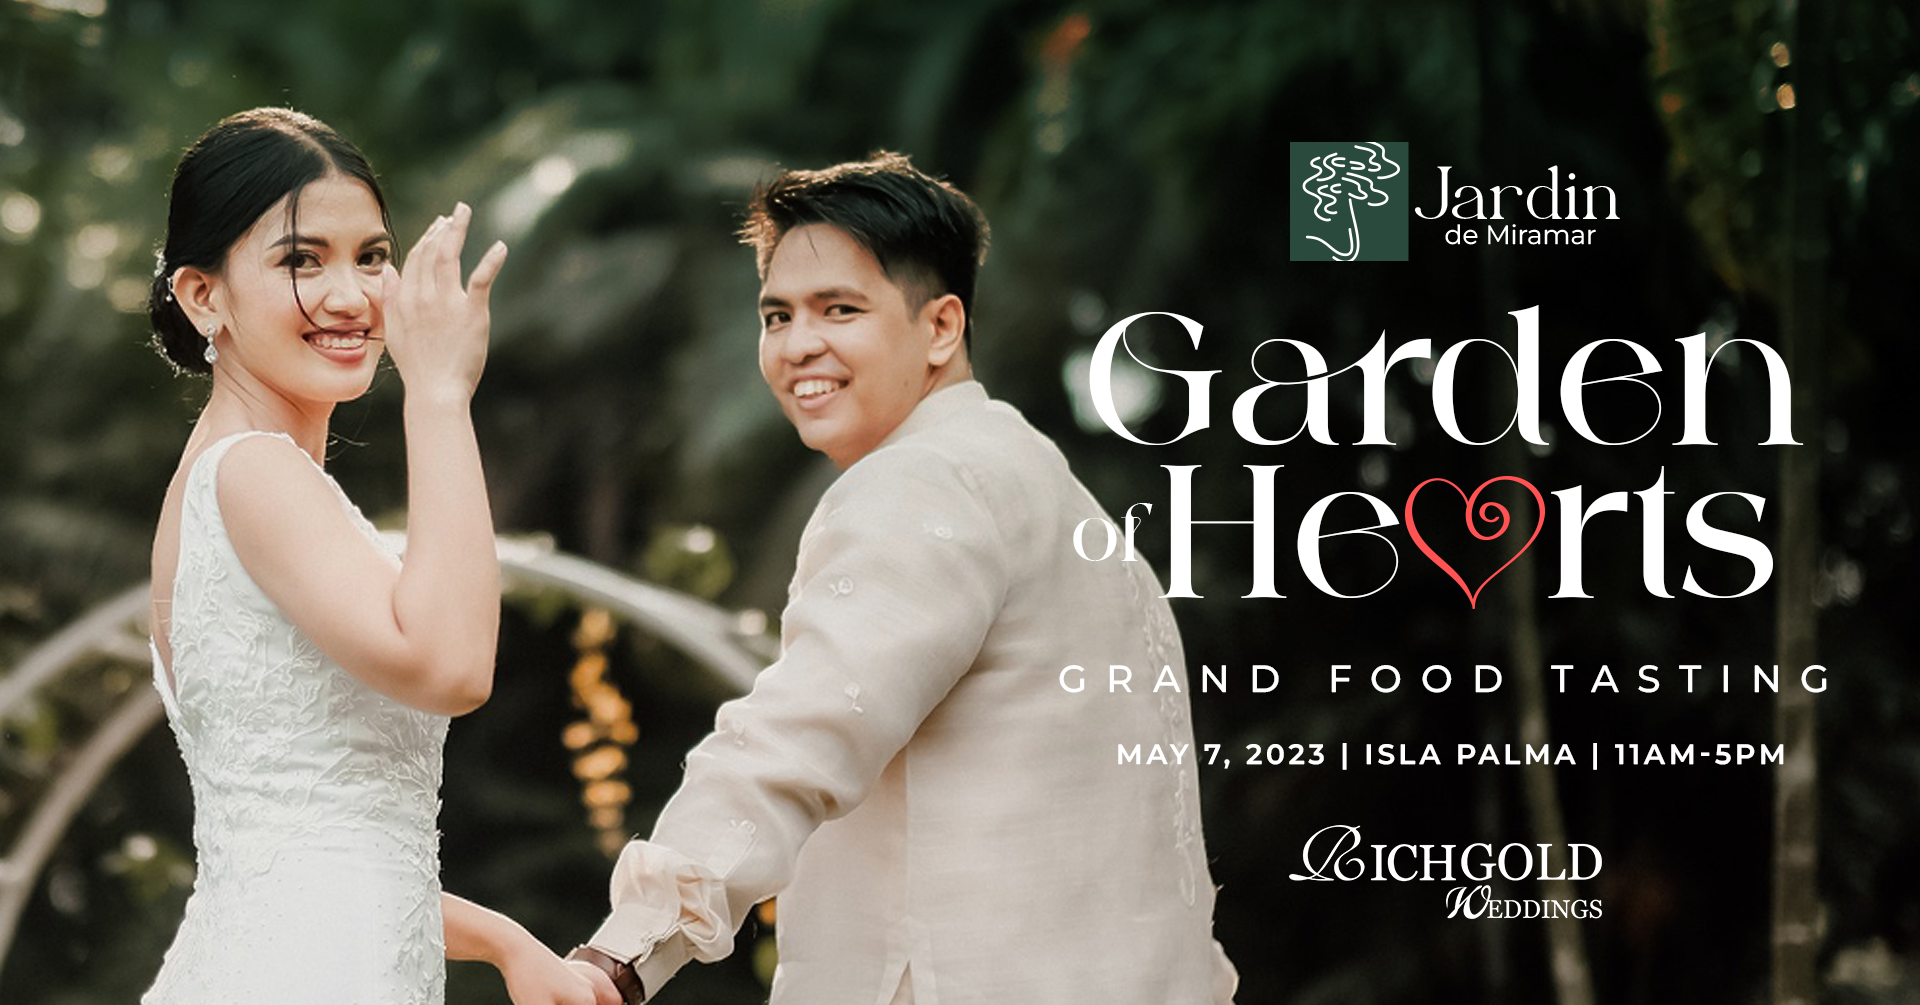 Garden of Hearts Rich Gold Catering